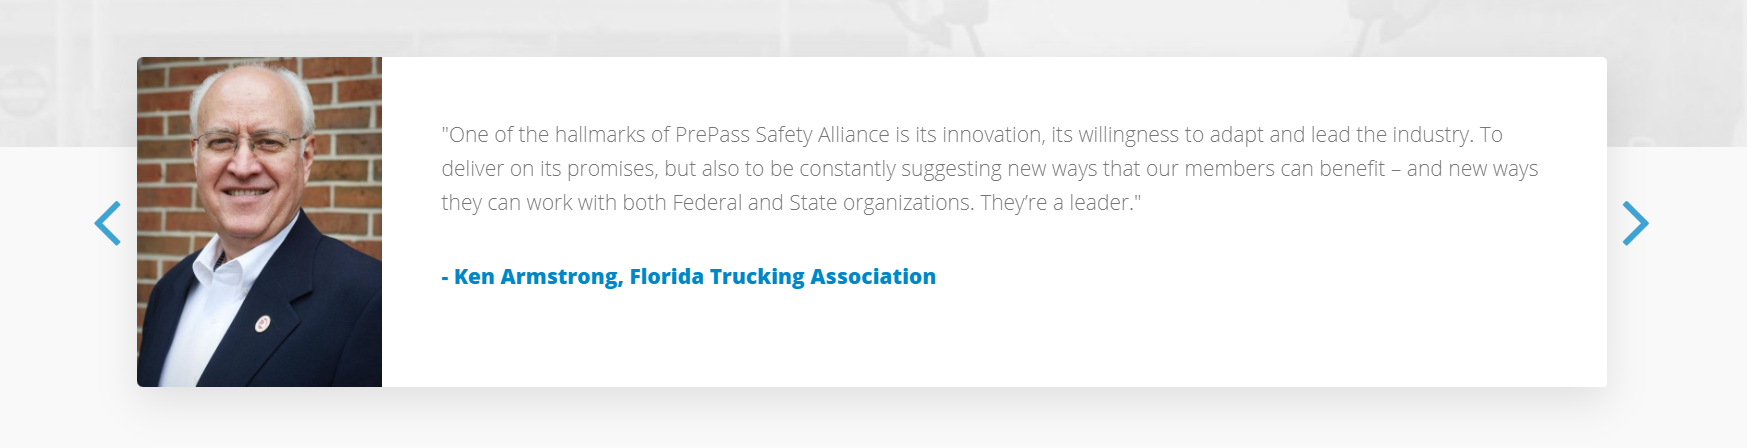 An endorsement from Ken Armstrong of the Florida Trucking Association. He's both credible and relevant to the company.